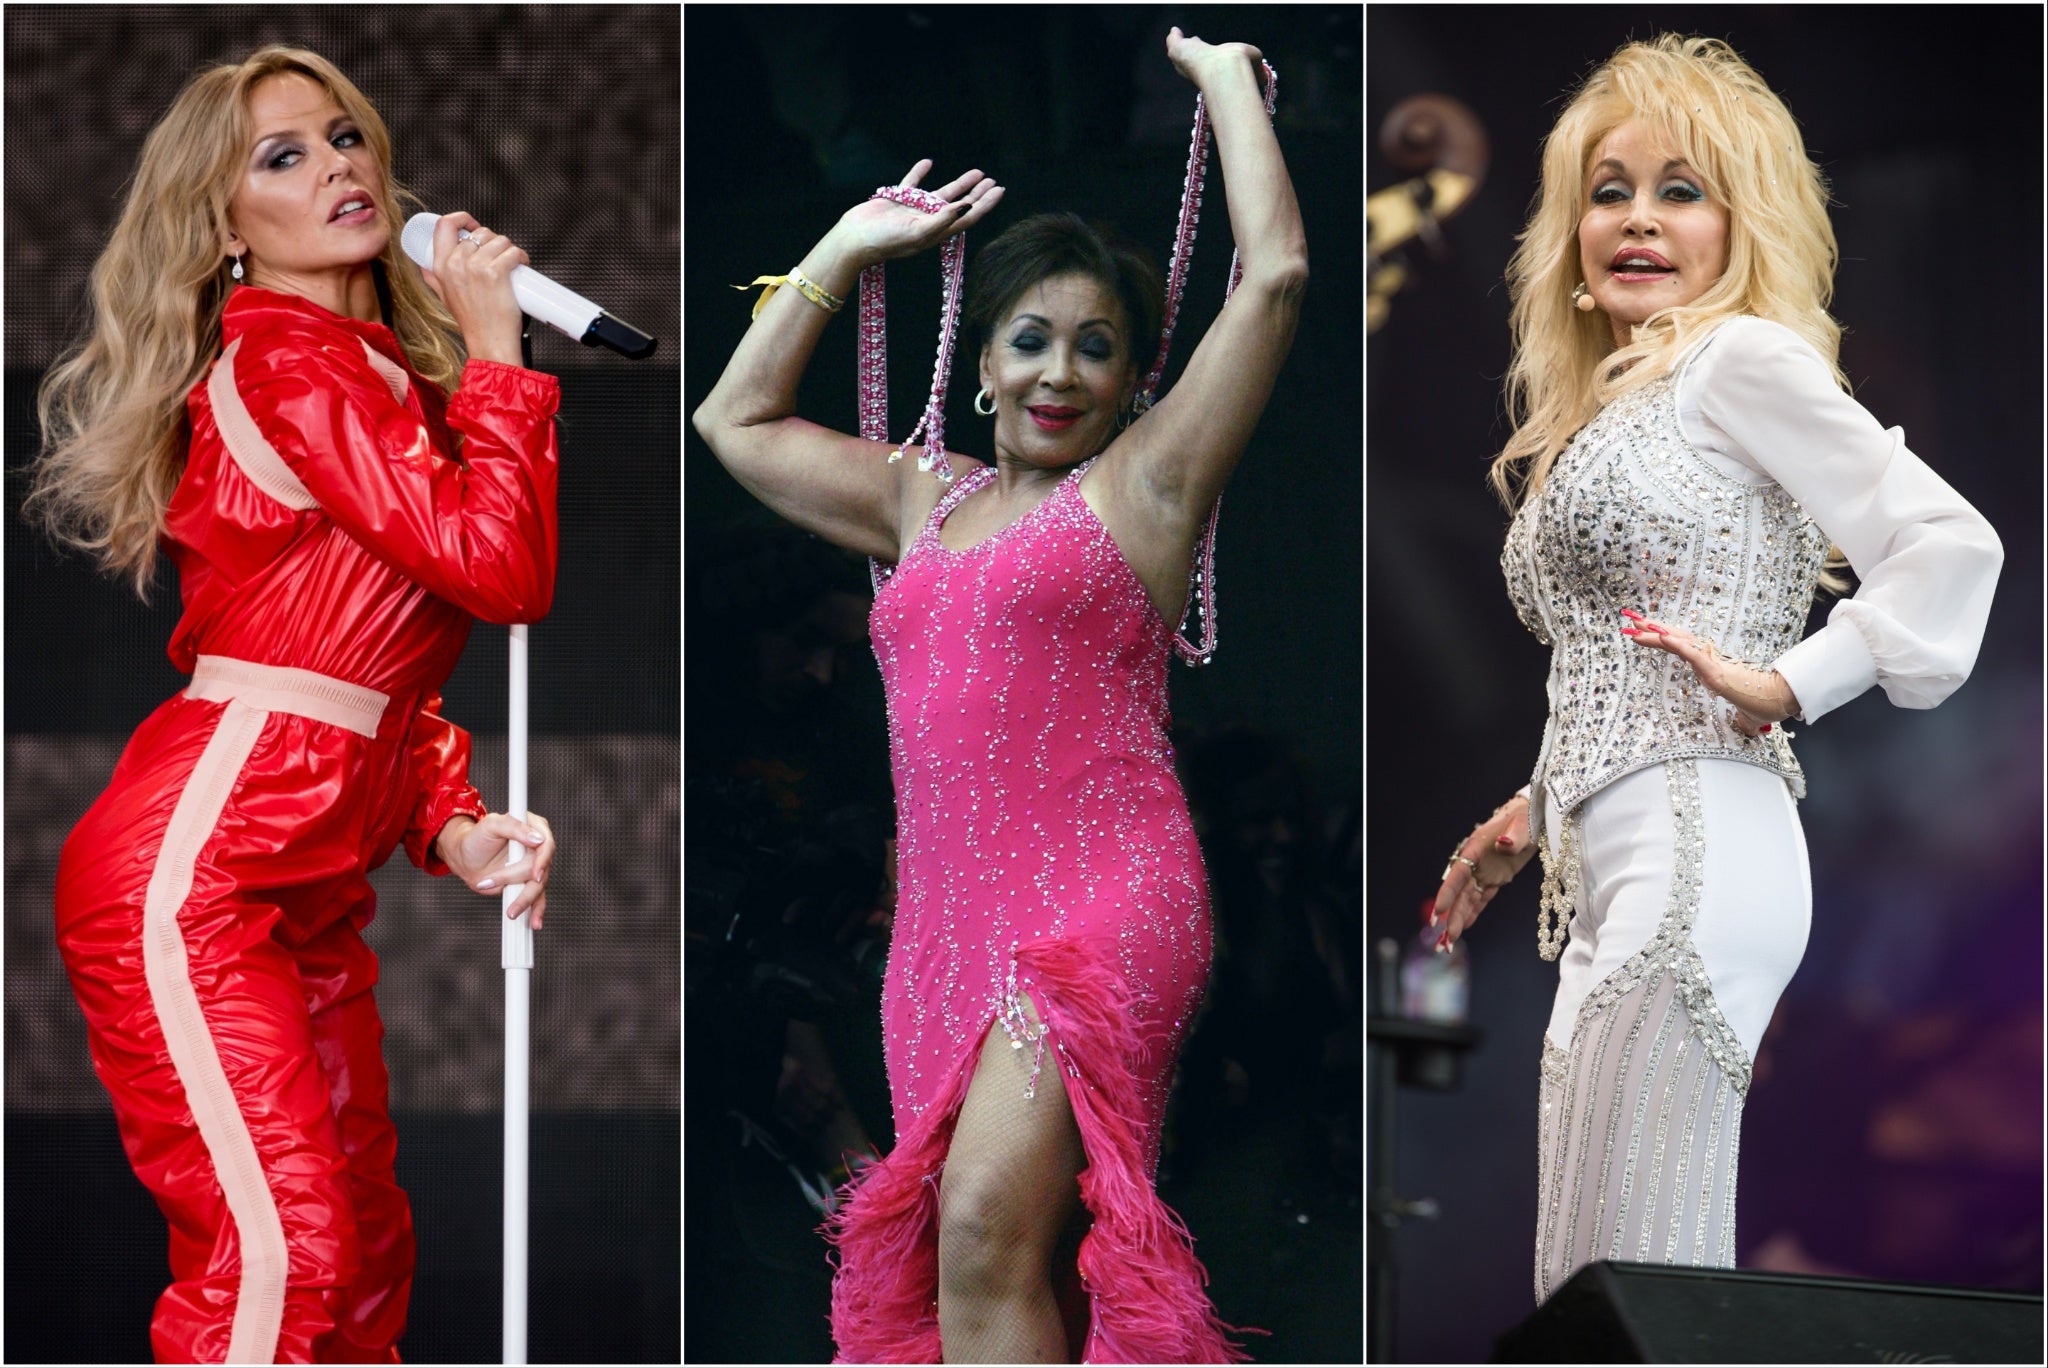 L-R: Kylie Minogue, Shirley Bassey and Dolly Parton performing in the Legends Slot on the Pyramid Stage at Glastonbury Festival